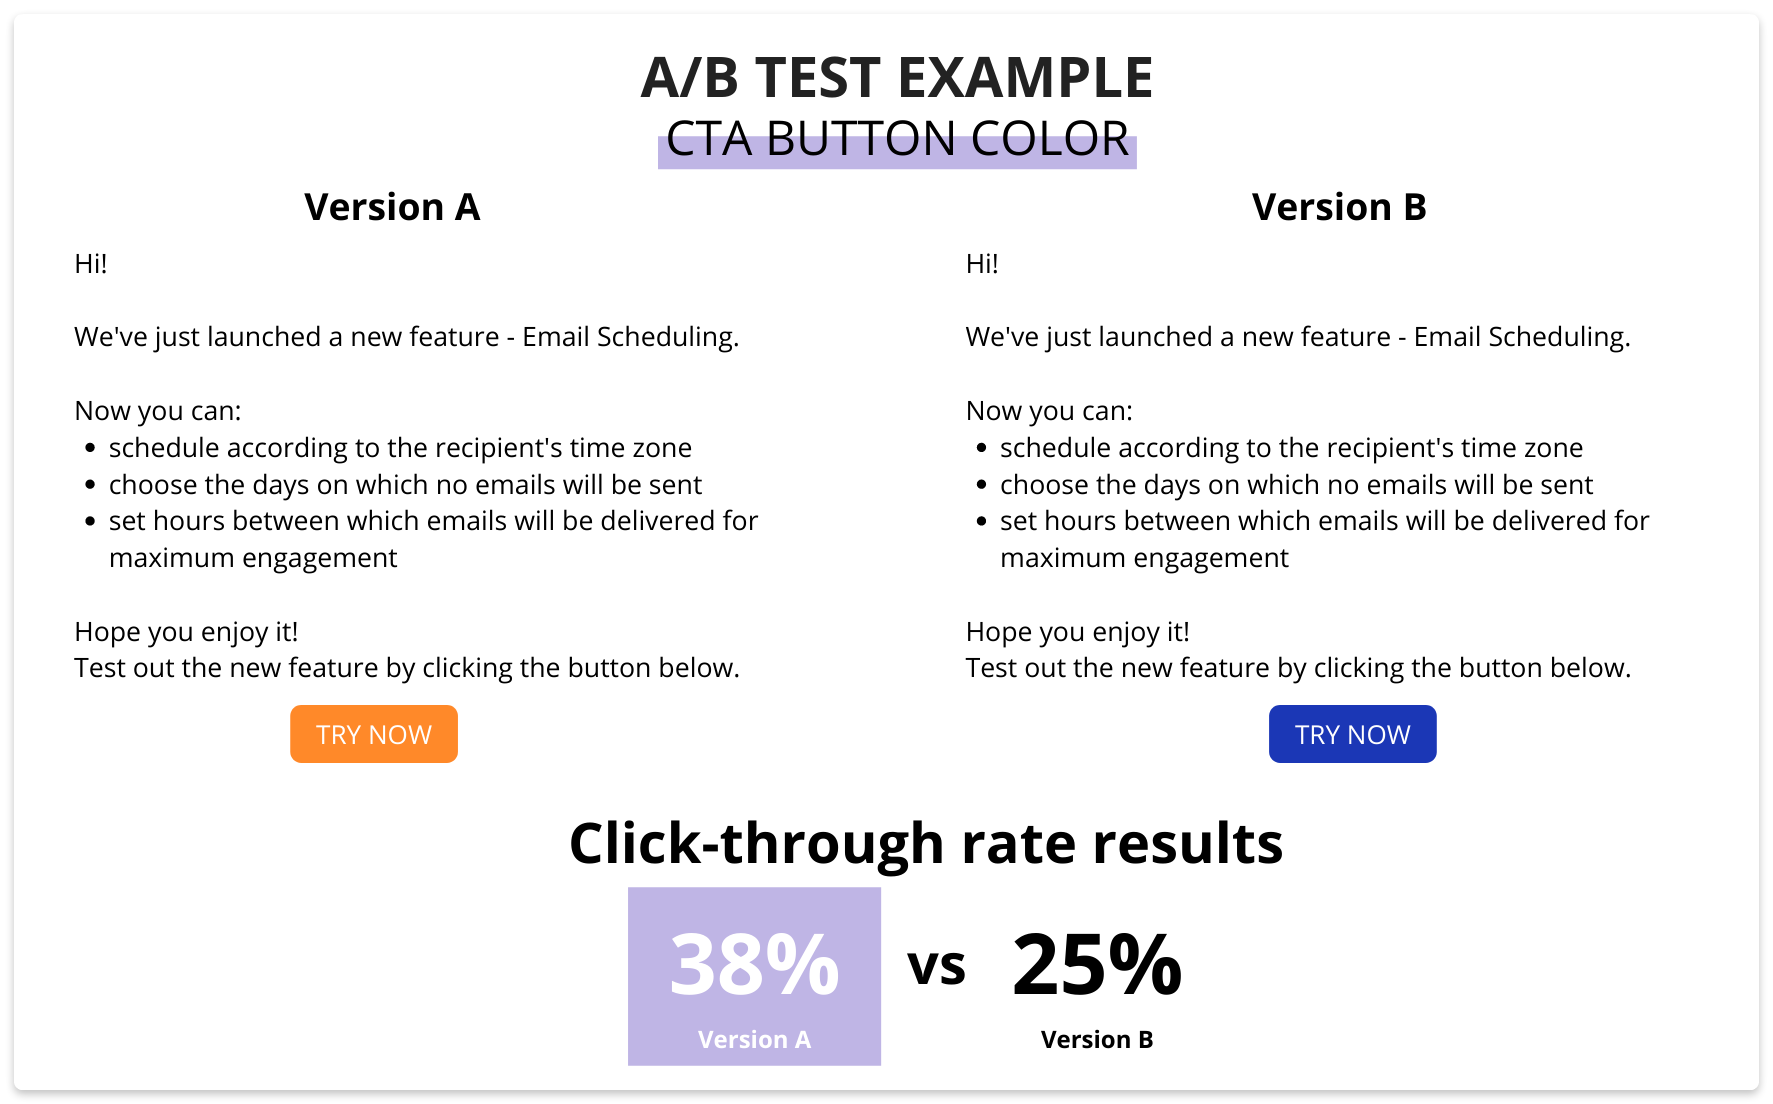 A/B test example